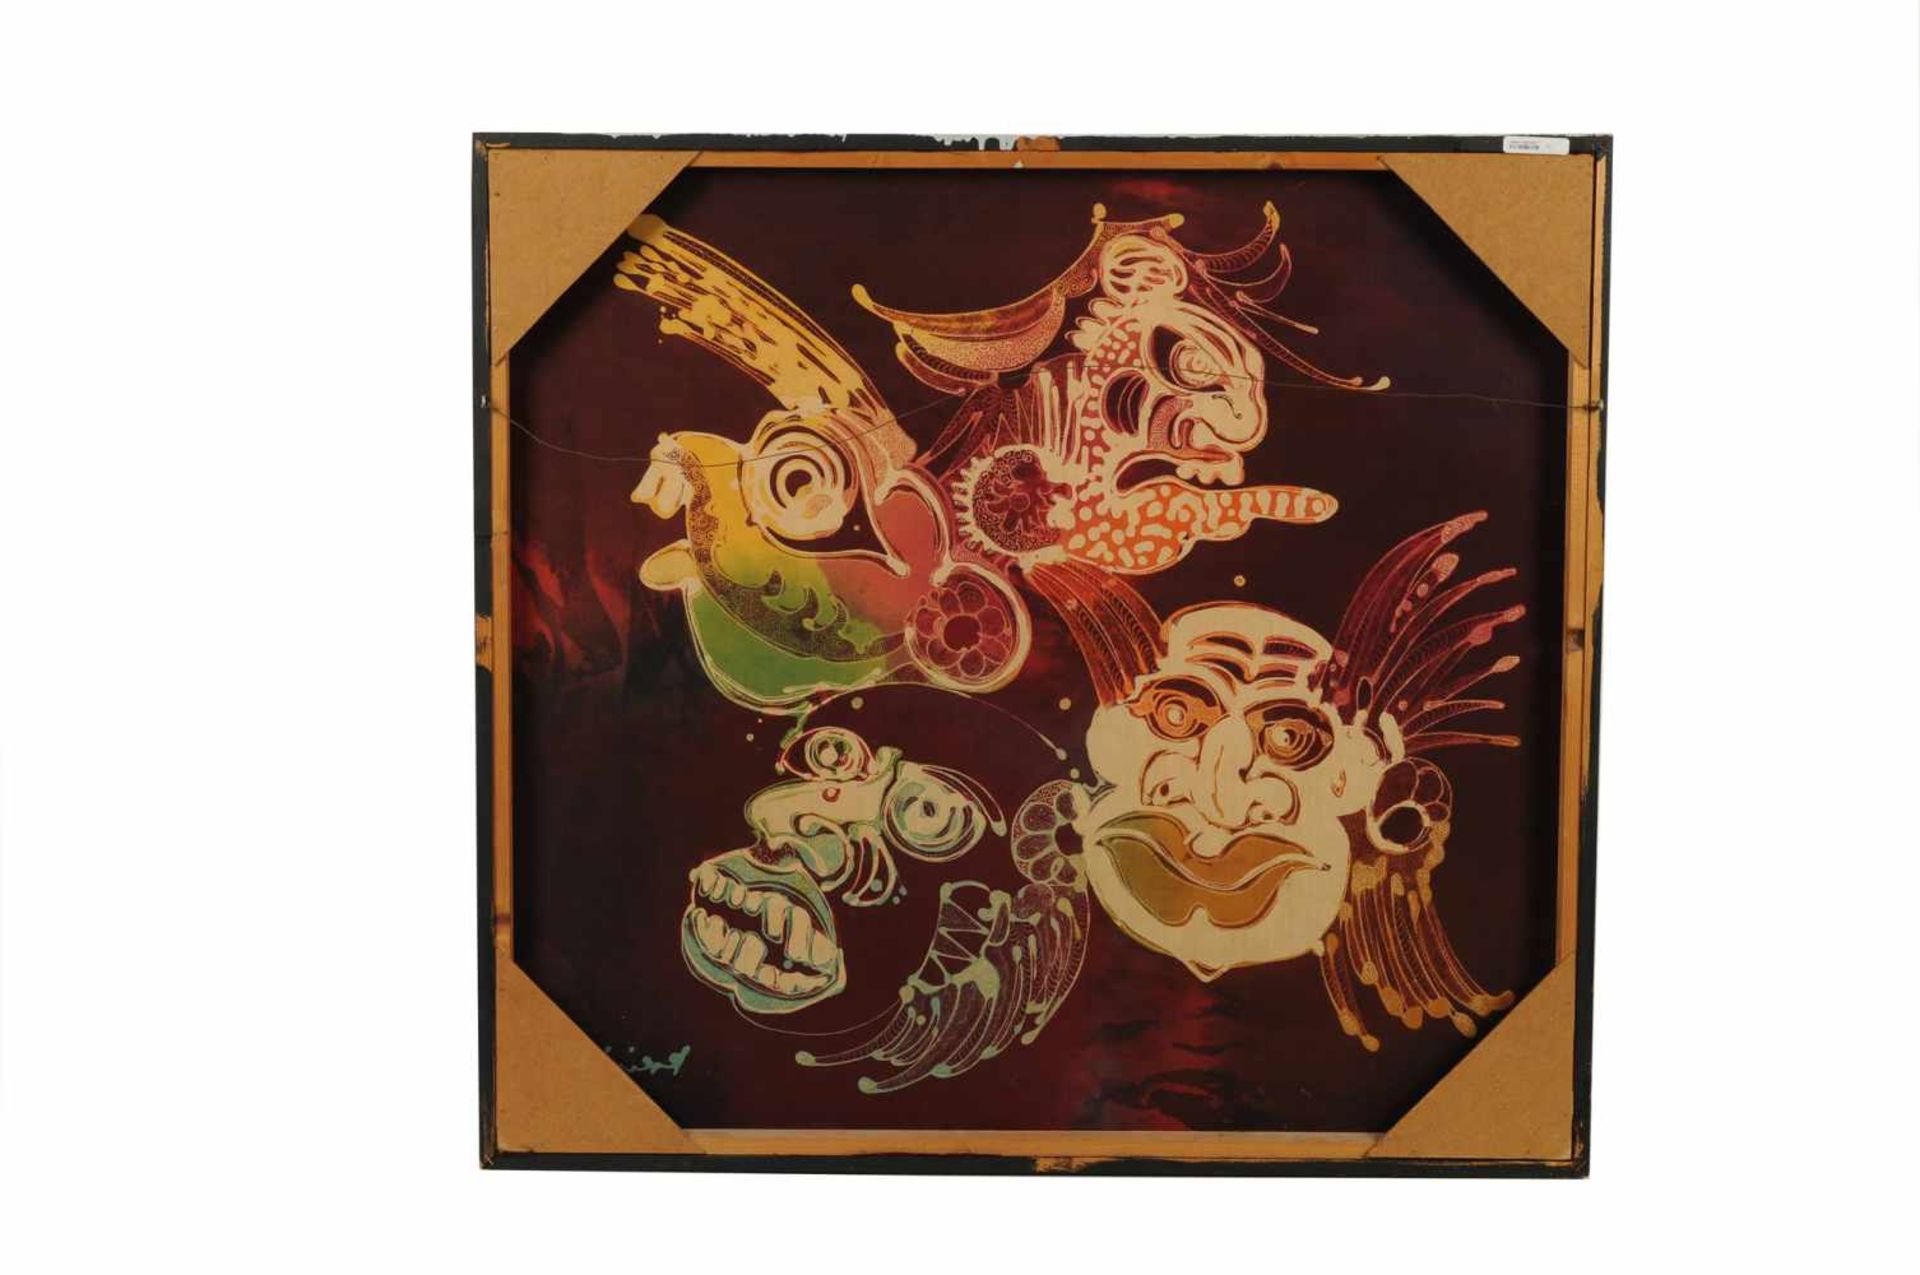 Krijono (1951-2011) 'Masks', signed and dated '79 lower right, batik on canvas. 79 x 85 cm. - Image 4 of 4